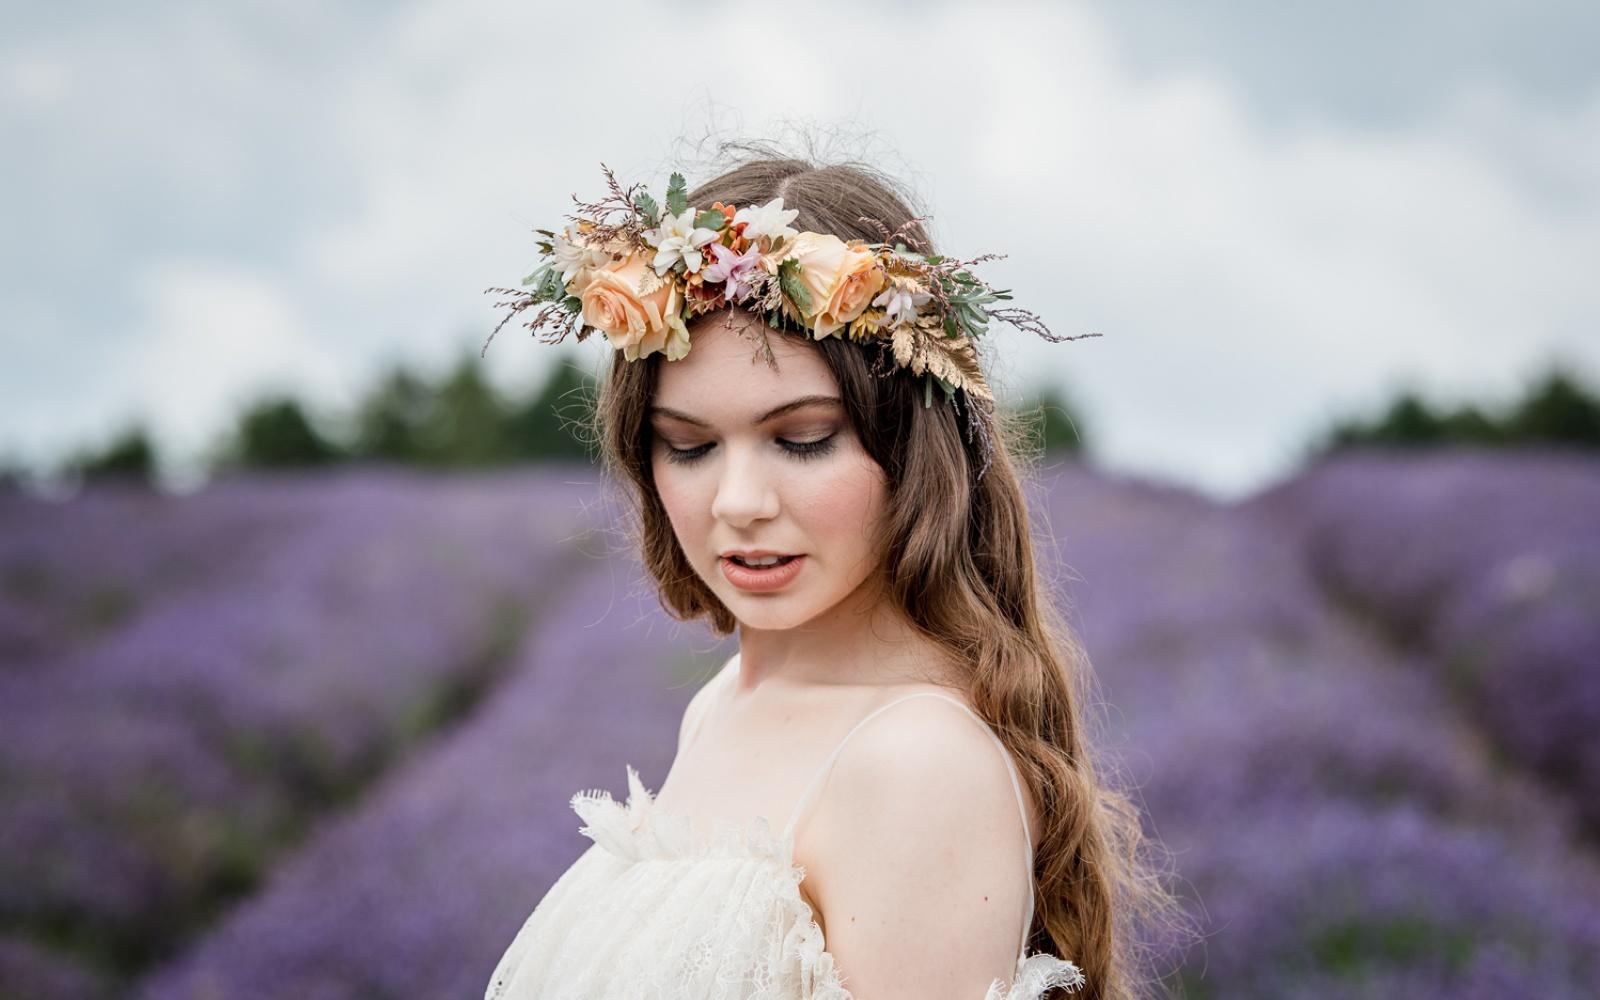 Styled Shoot ideas inspiration Capture Every Moment Make Up by Carissa Wendy House Flowers Willoughby Wolf lavender fields Snowshill soft look curls flower crown peach roses